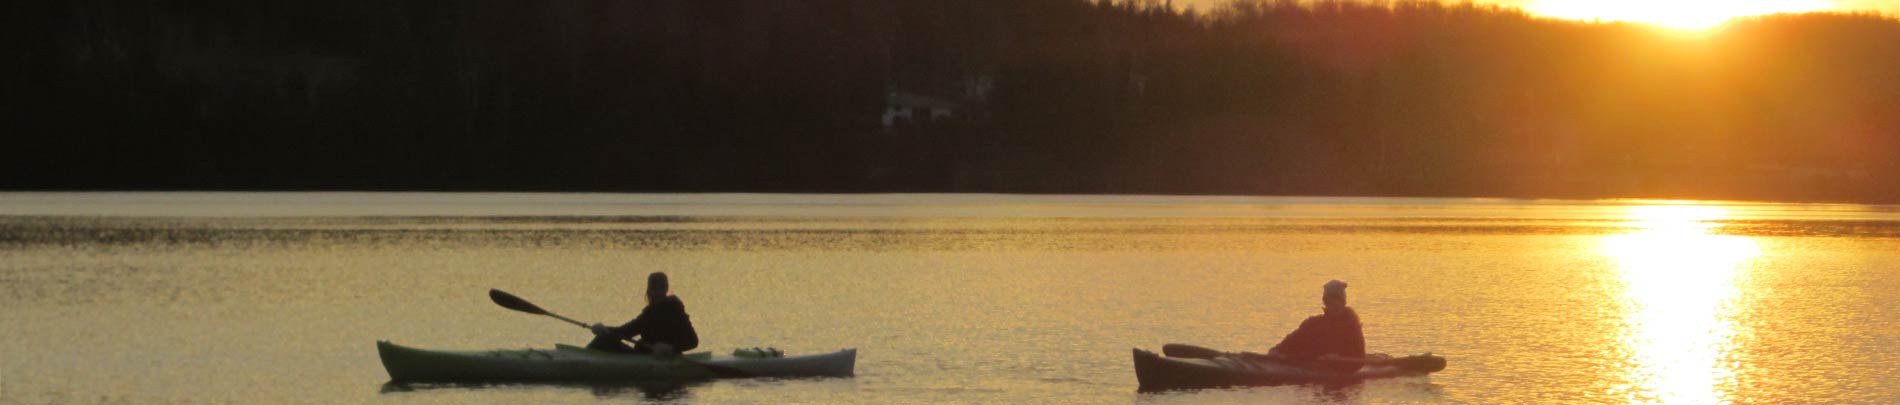 Canoes on Wilbermere Lake at sunset.